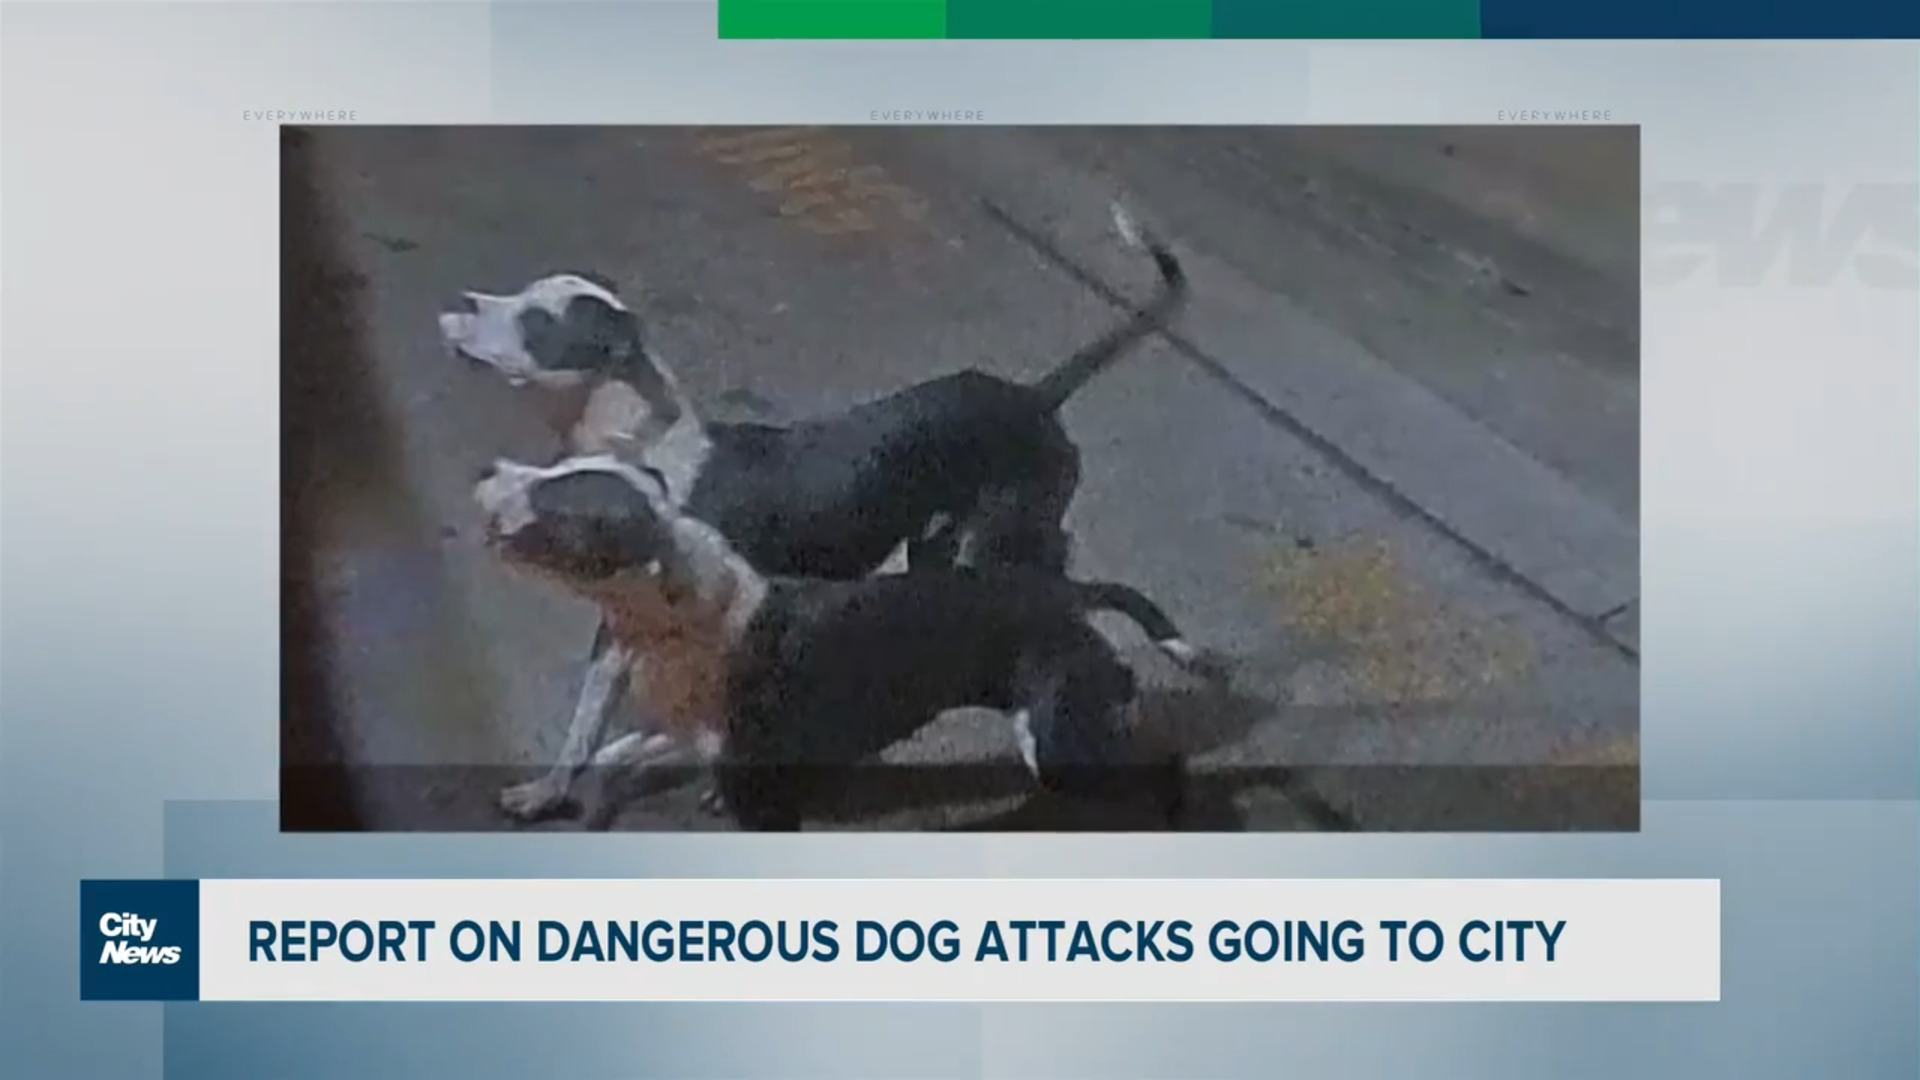 City considering changes to how it responds to dangerous dog attacks